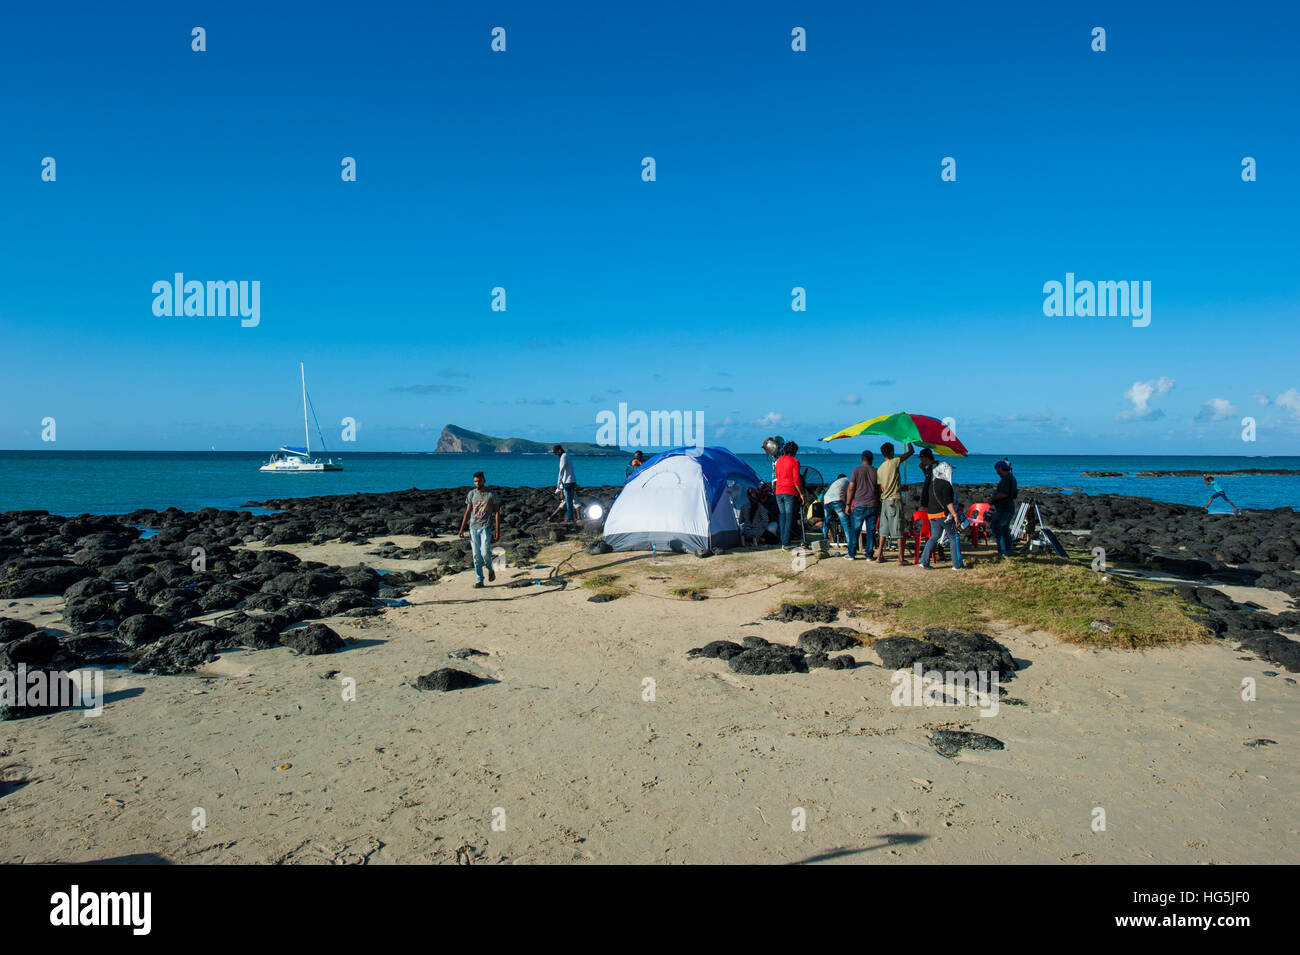 A film crew in Cap Malheureux, Mauritius. The Coin de Mire island in the background. Stock Photo